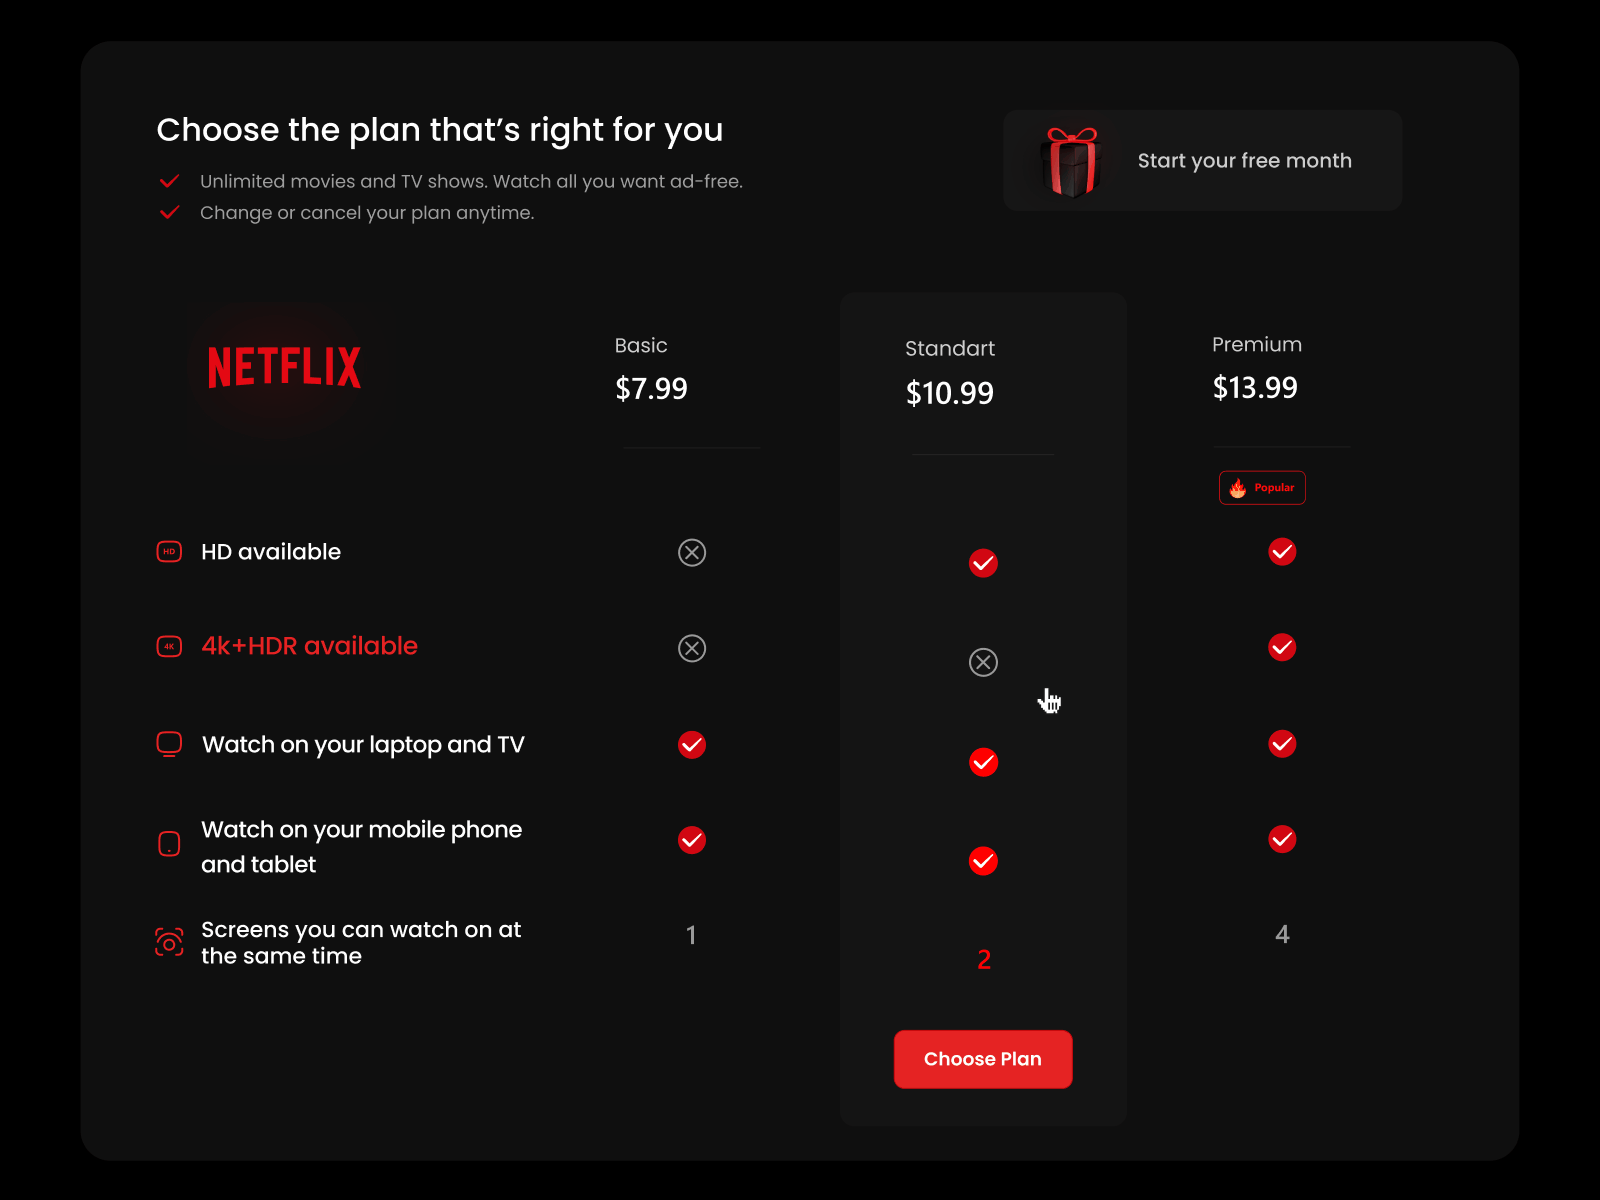 Player layout is changed? : r/netflix